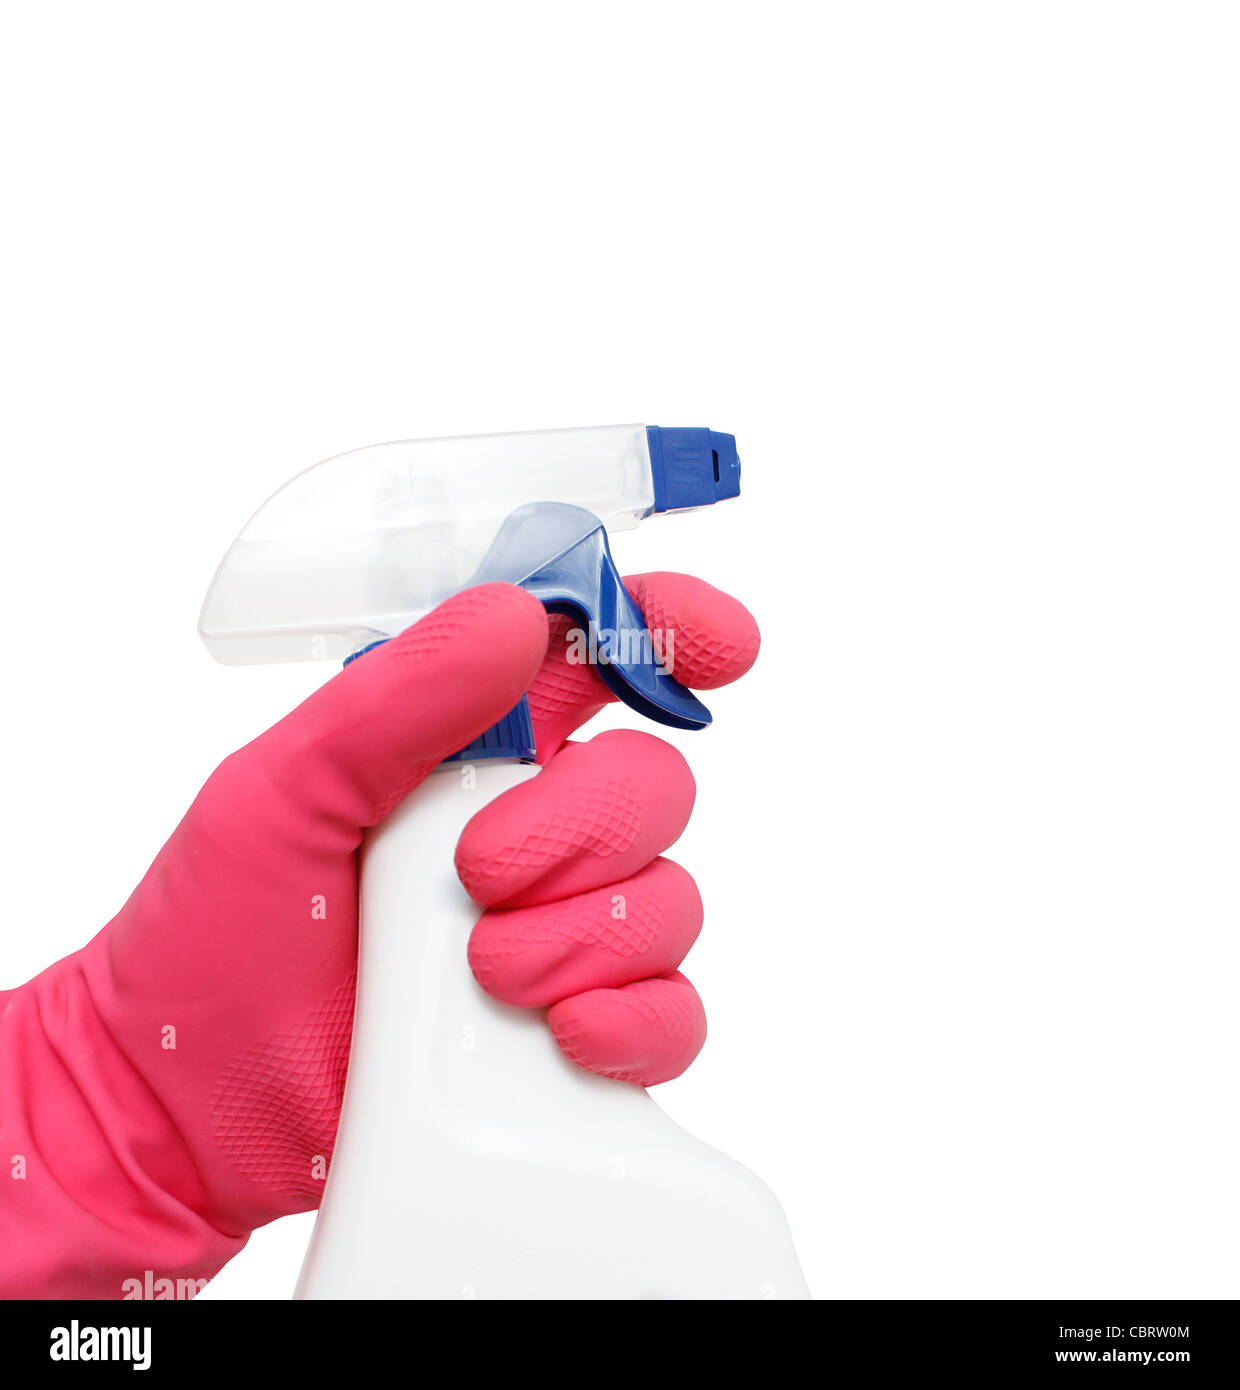 Cleaning product in use Stock Photo